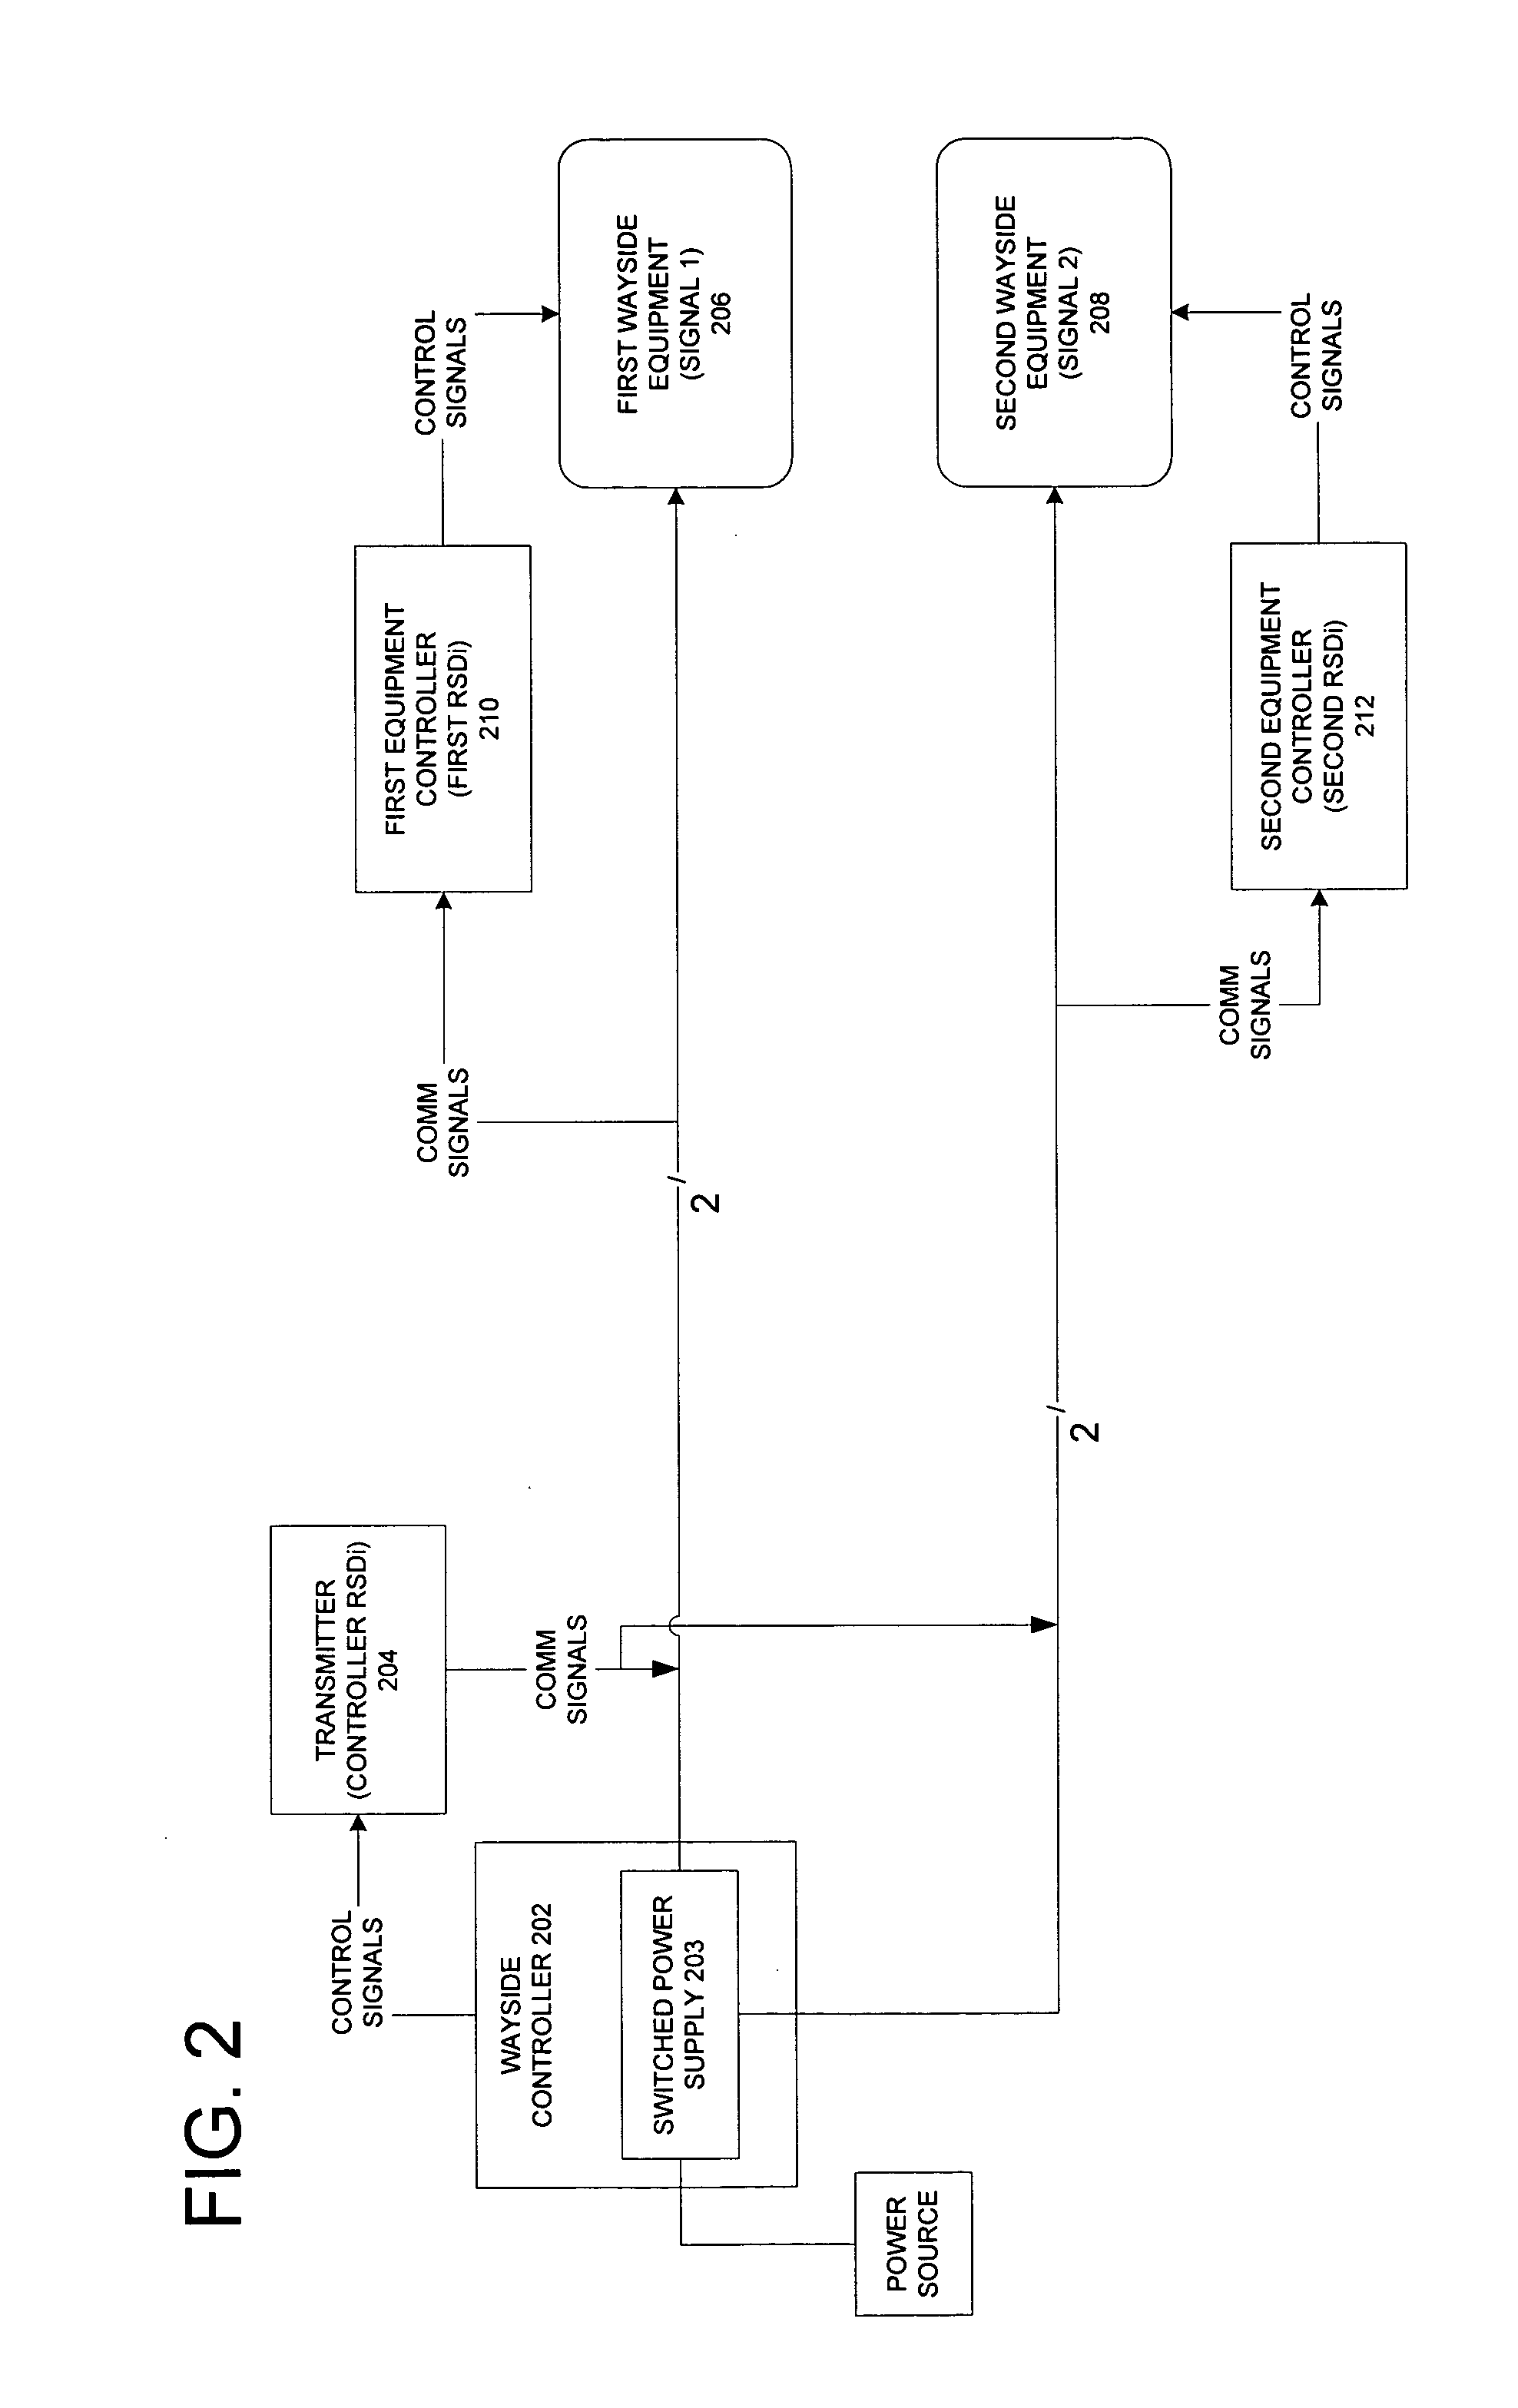 Remote system for monitoring and controlling railroad wayside equipment